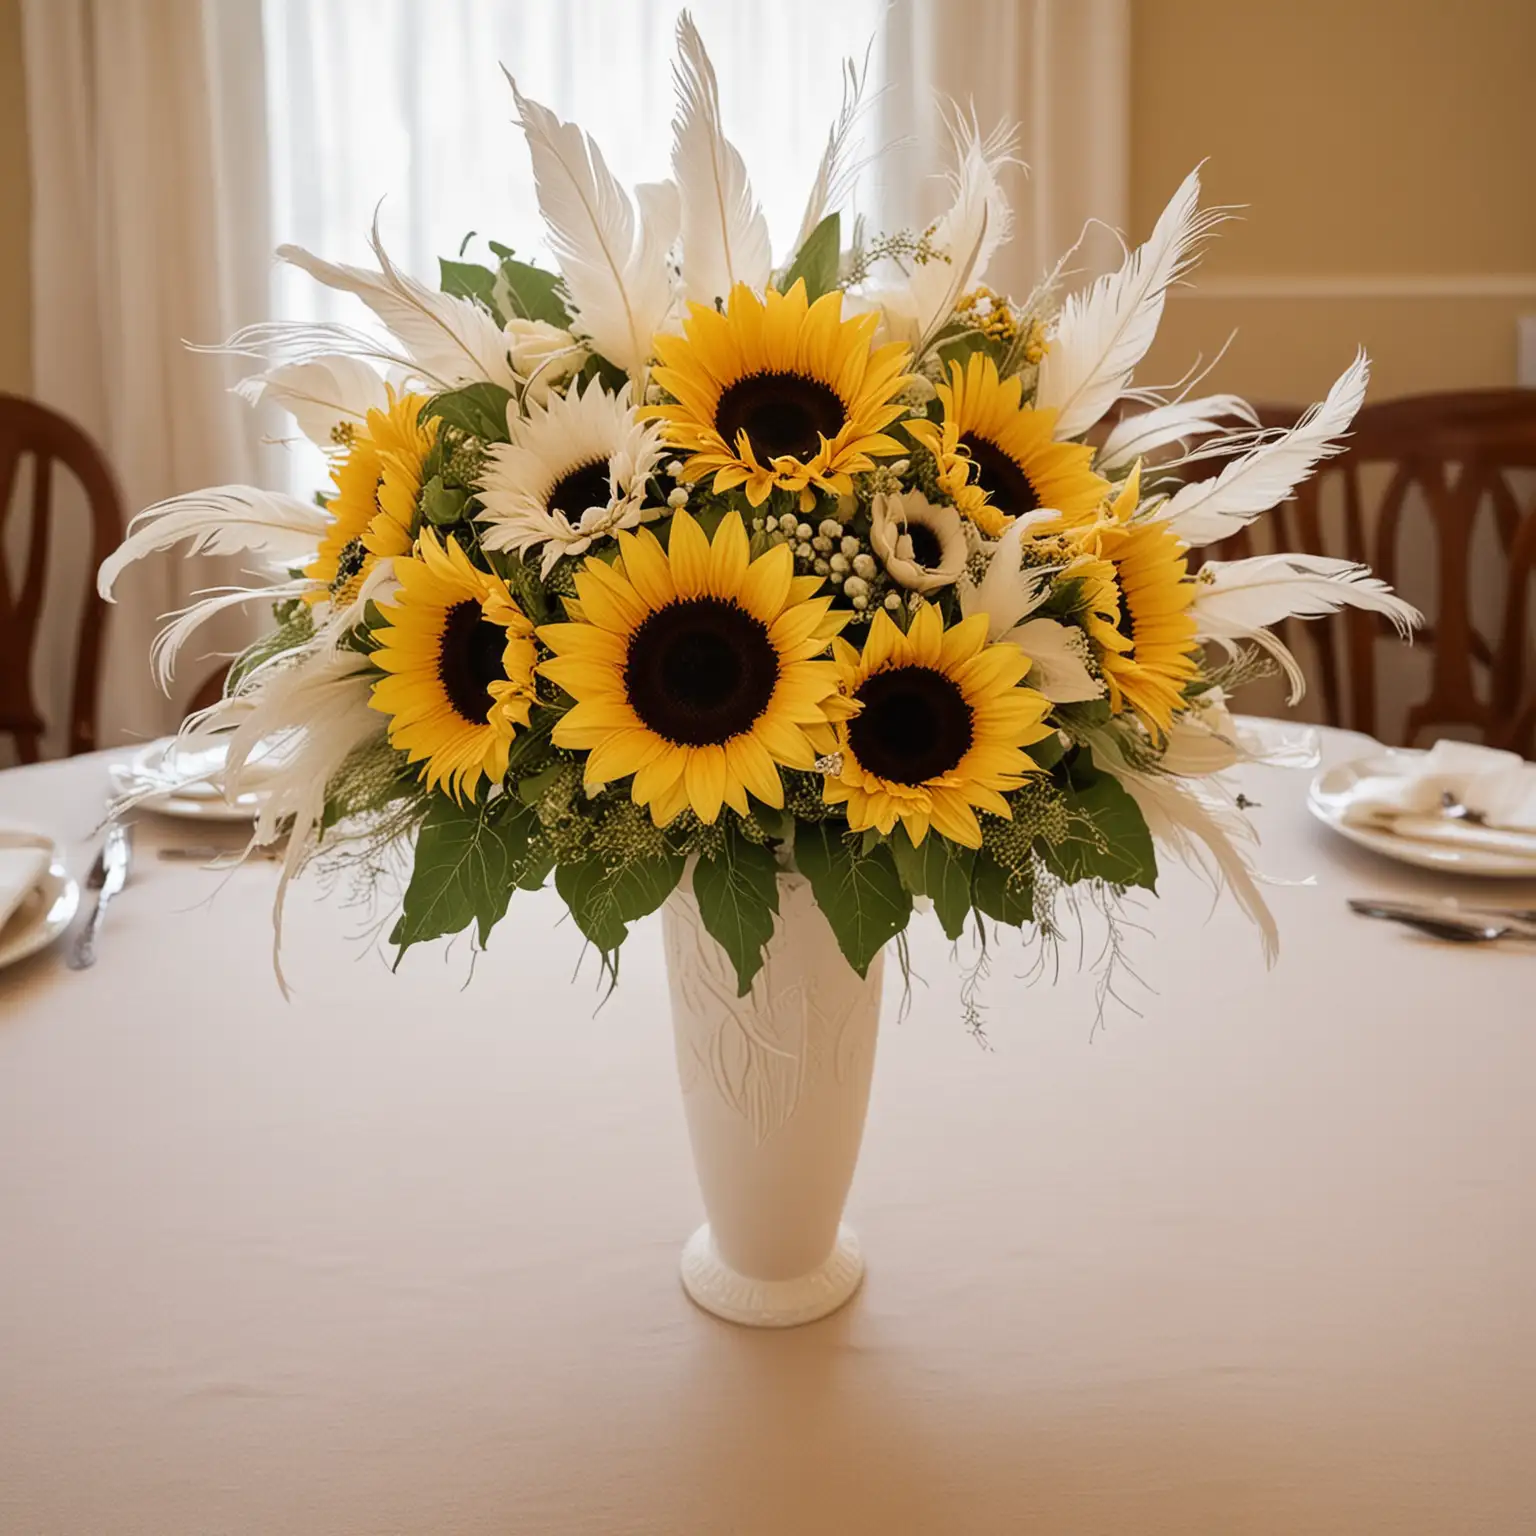 simple elegant wedding centerpiece with sunflowers and ivory feather embellishments in matching ivory vase